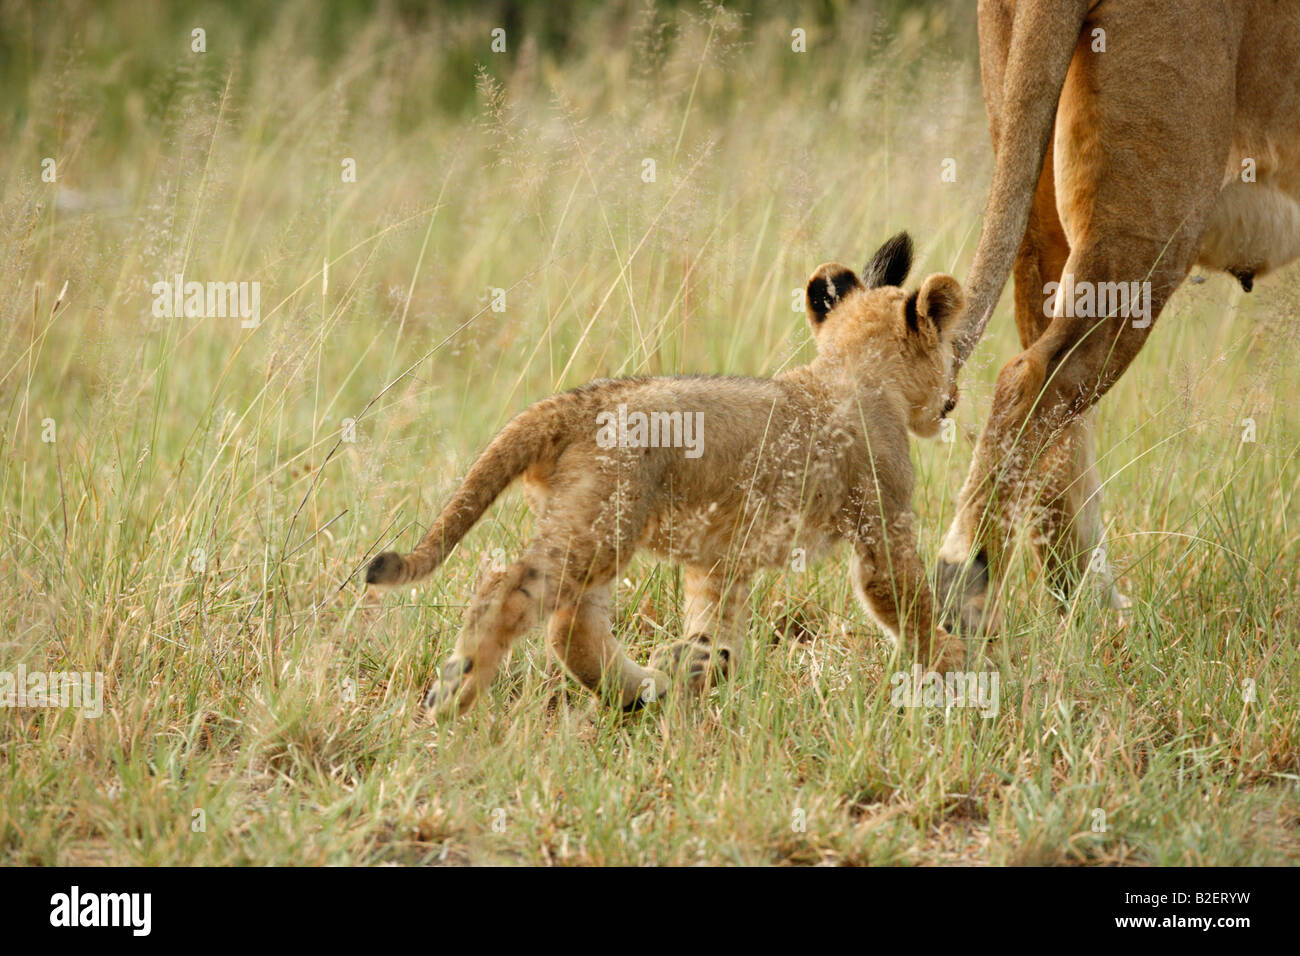 A young lion cub following its lactating mother Stock Photo